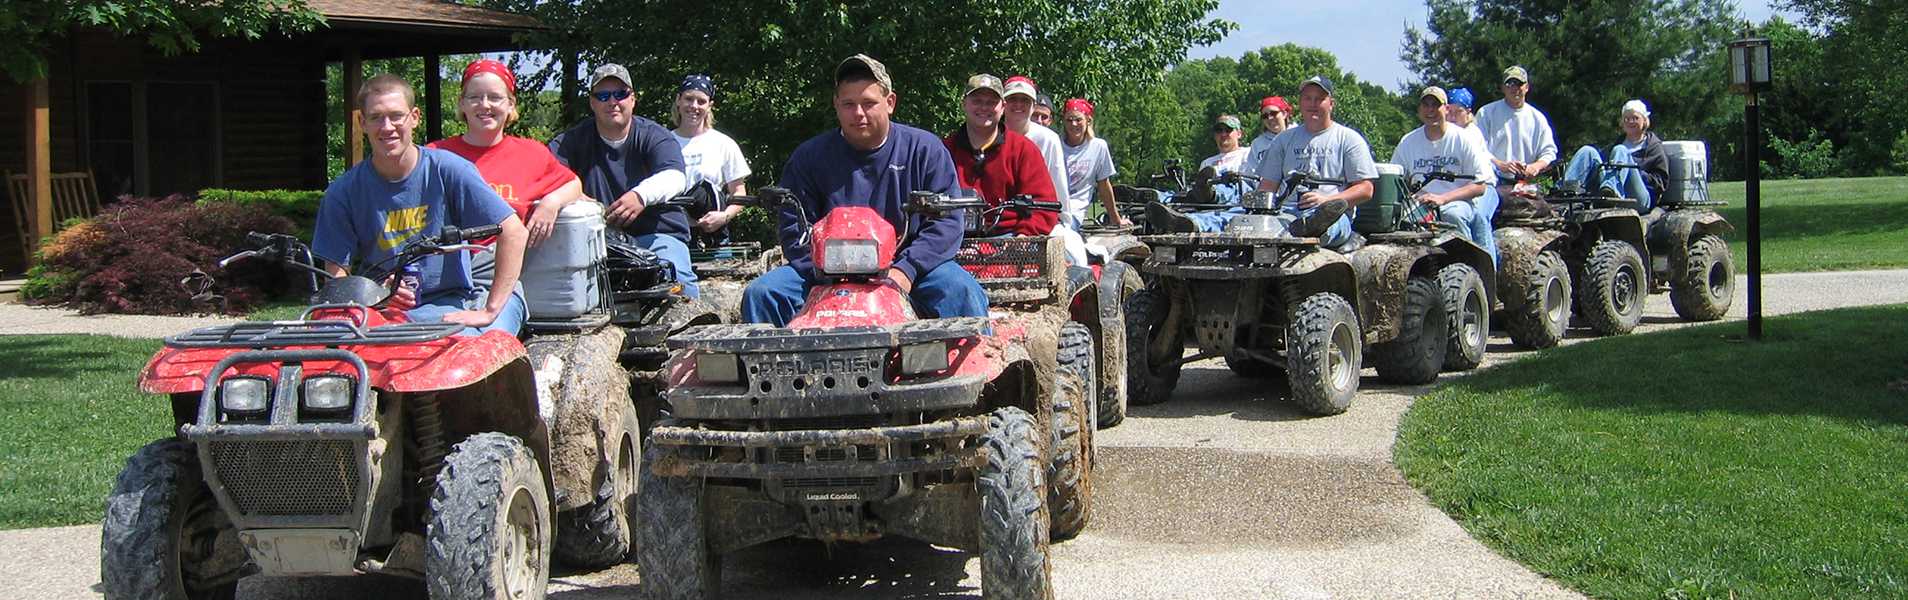 large-group-of-atv